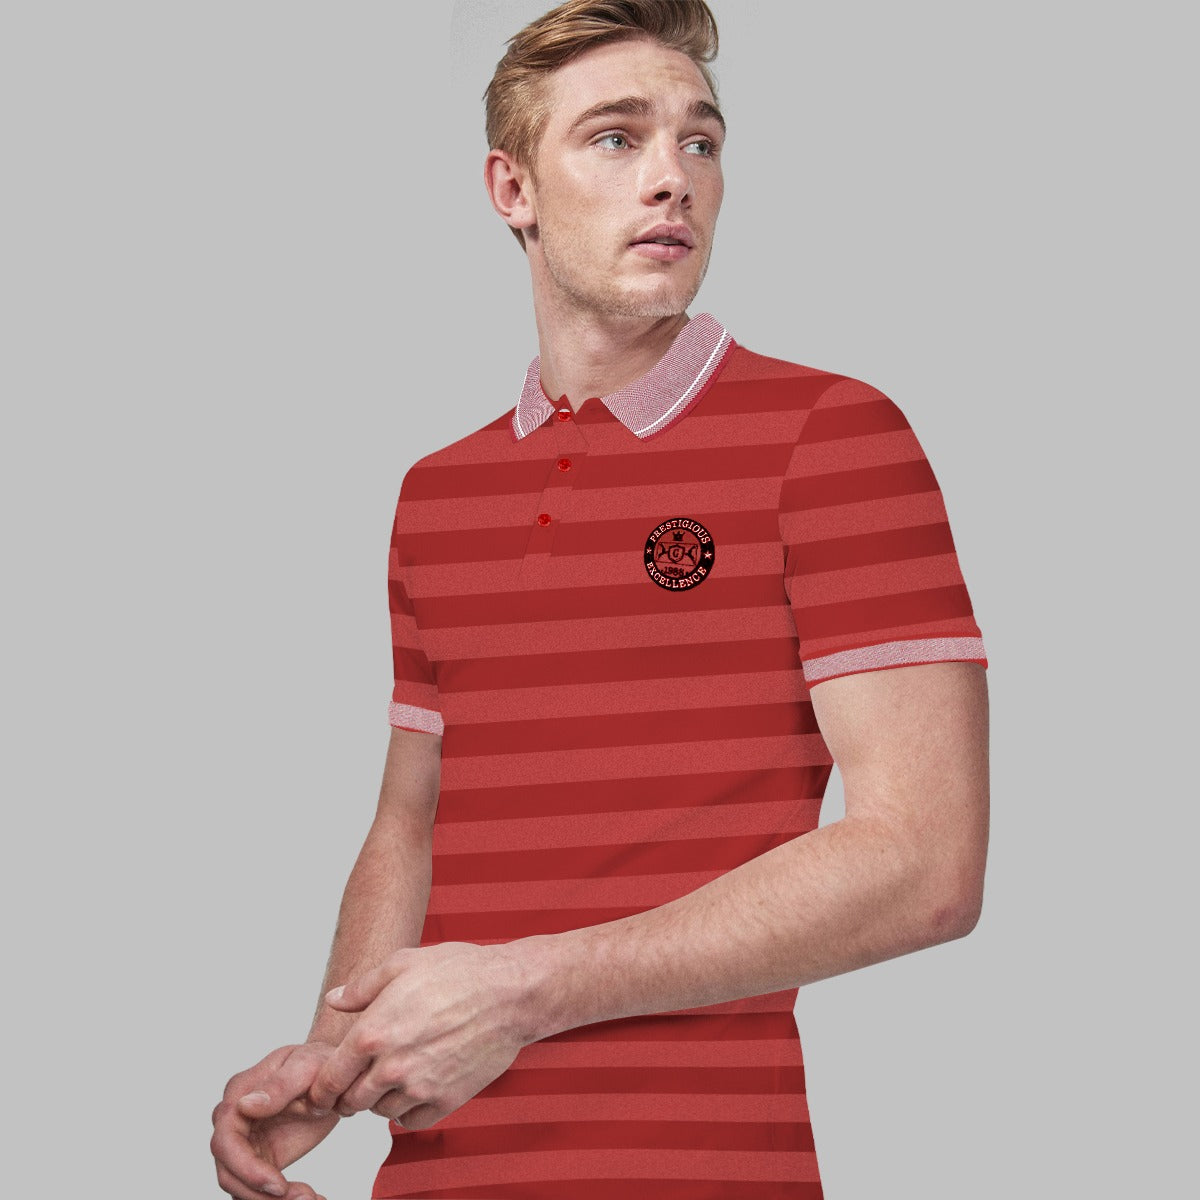 HG SIGNATURE EMB YARN DYED CONTRAST COLLAR POLO SHIRT